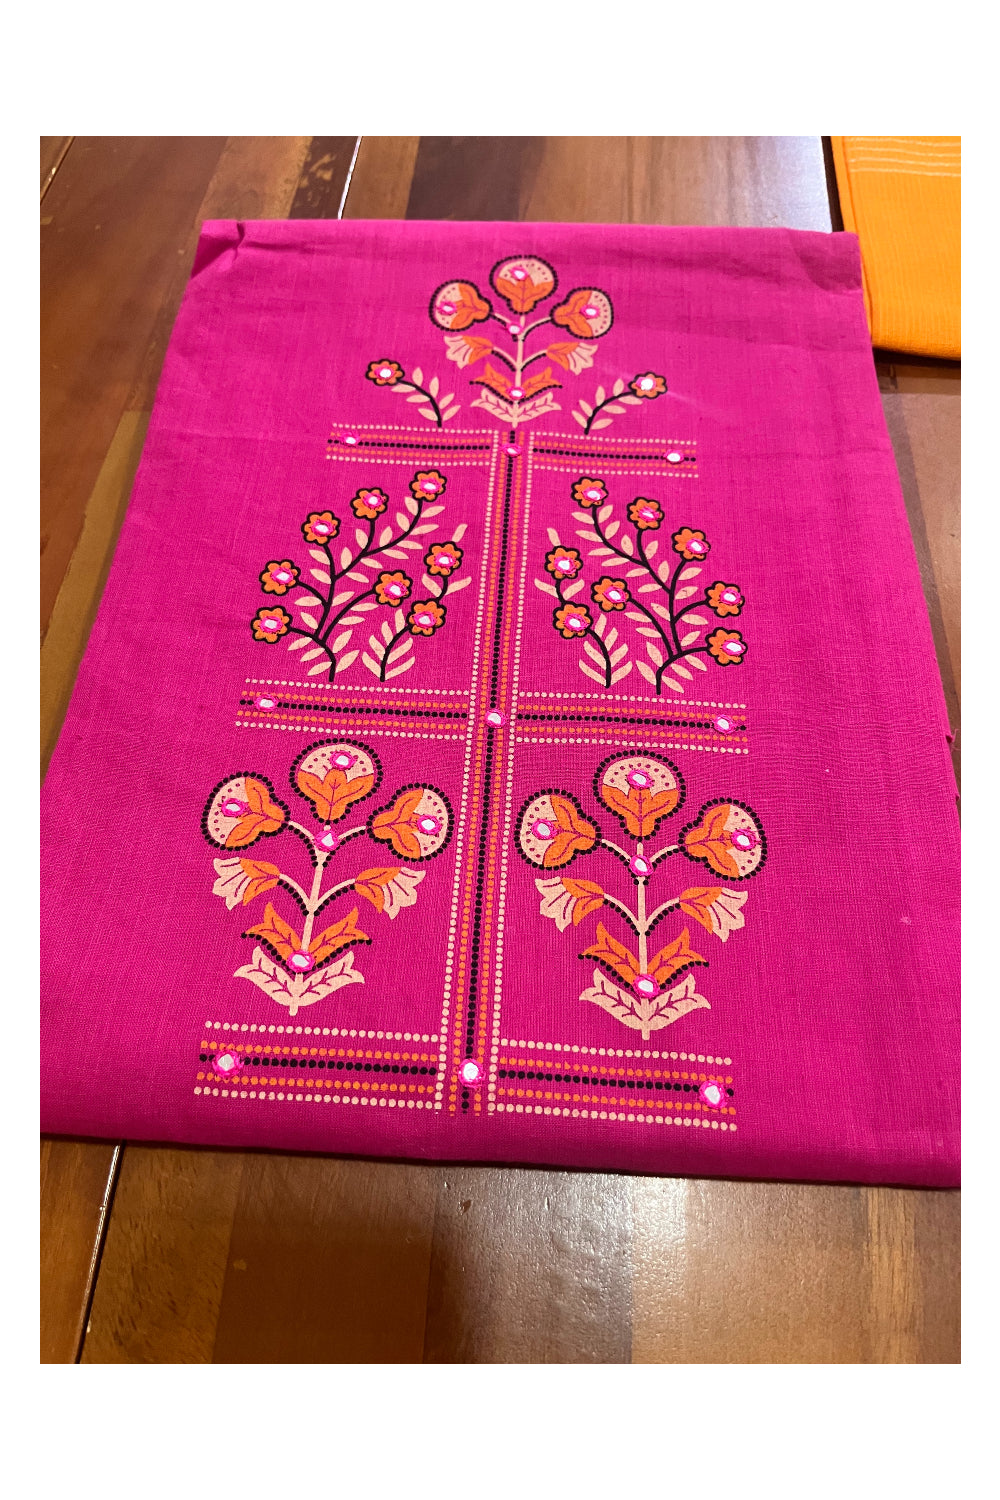 Southloom™ Cotton Churidar Salwar Suit Material in Magenta with Prints and Sequins Works